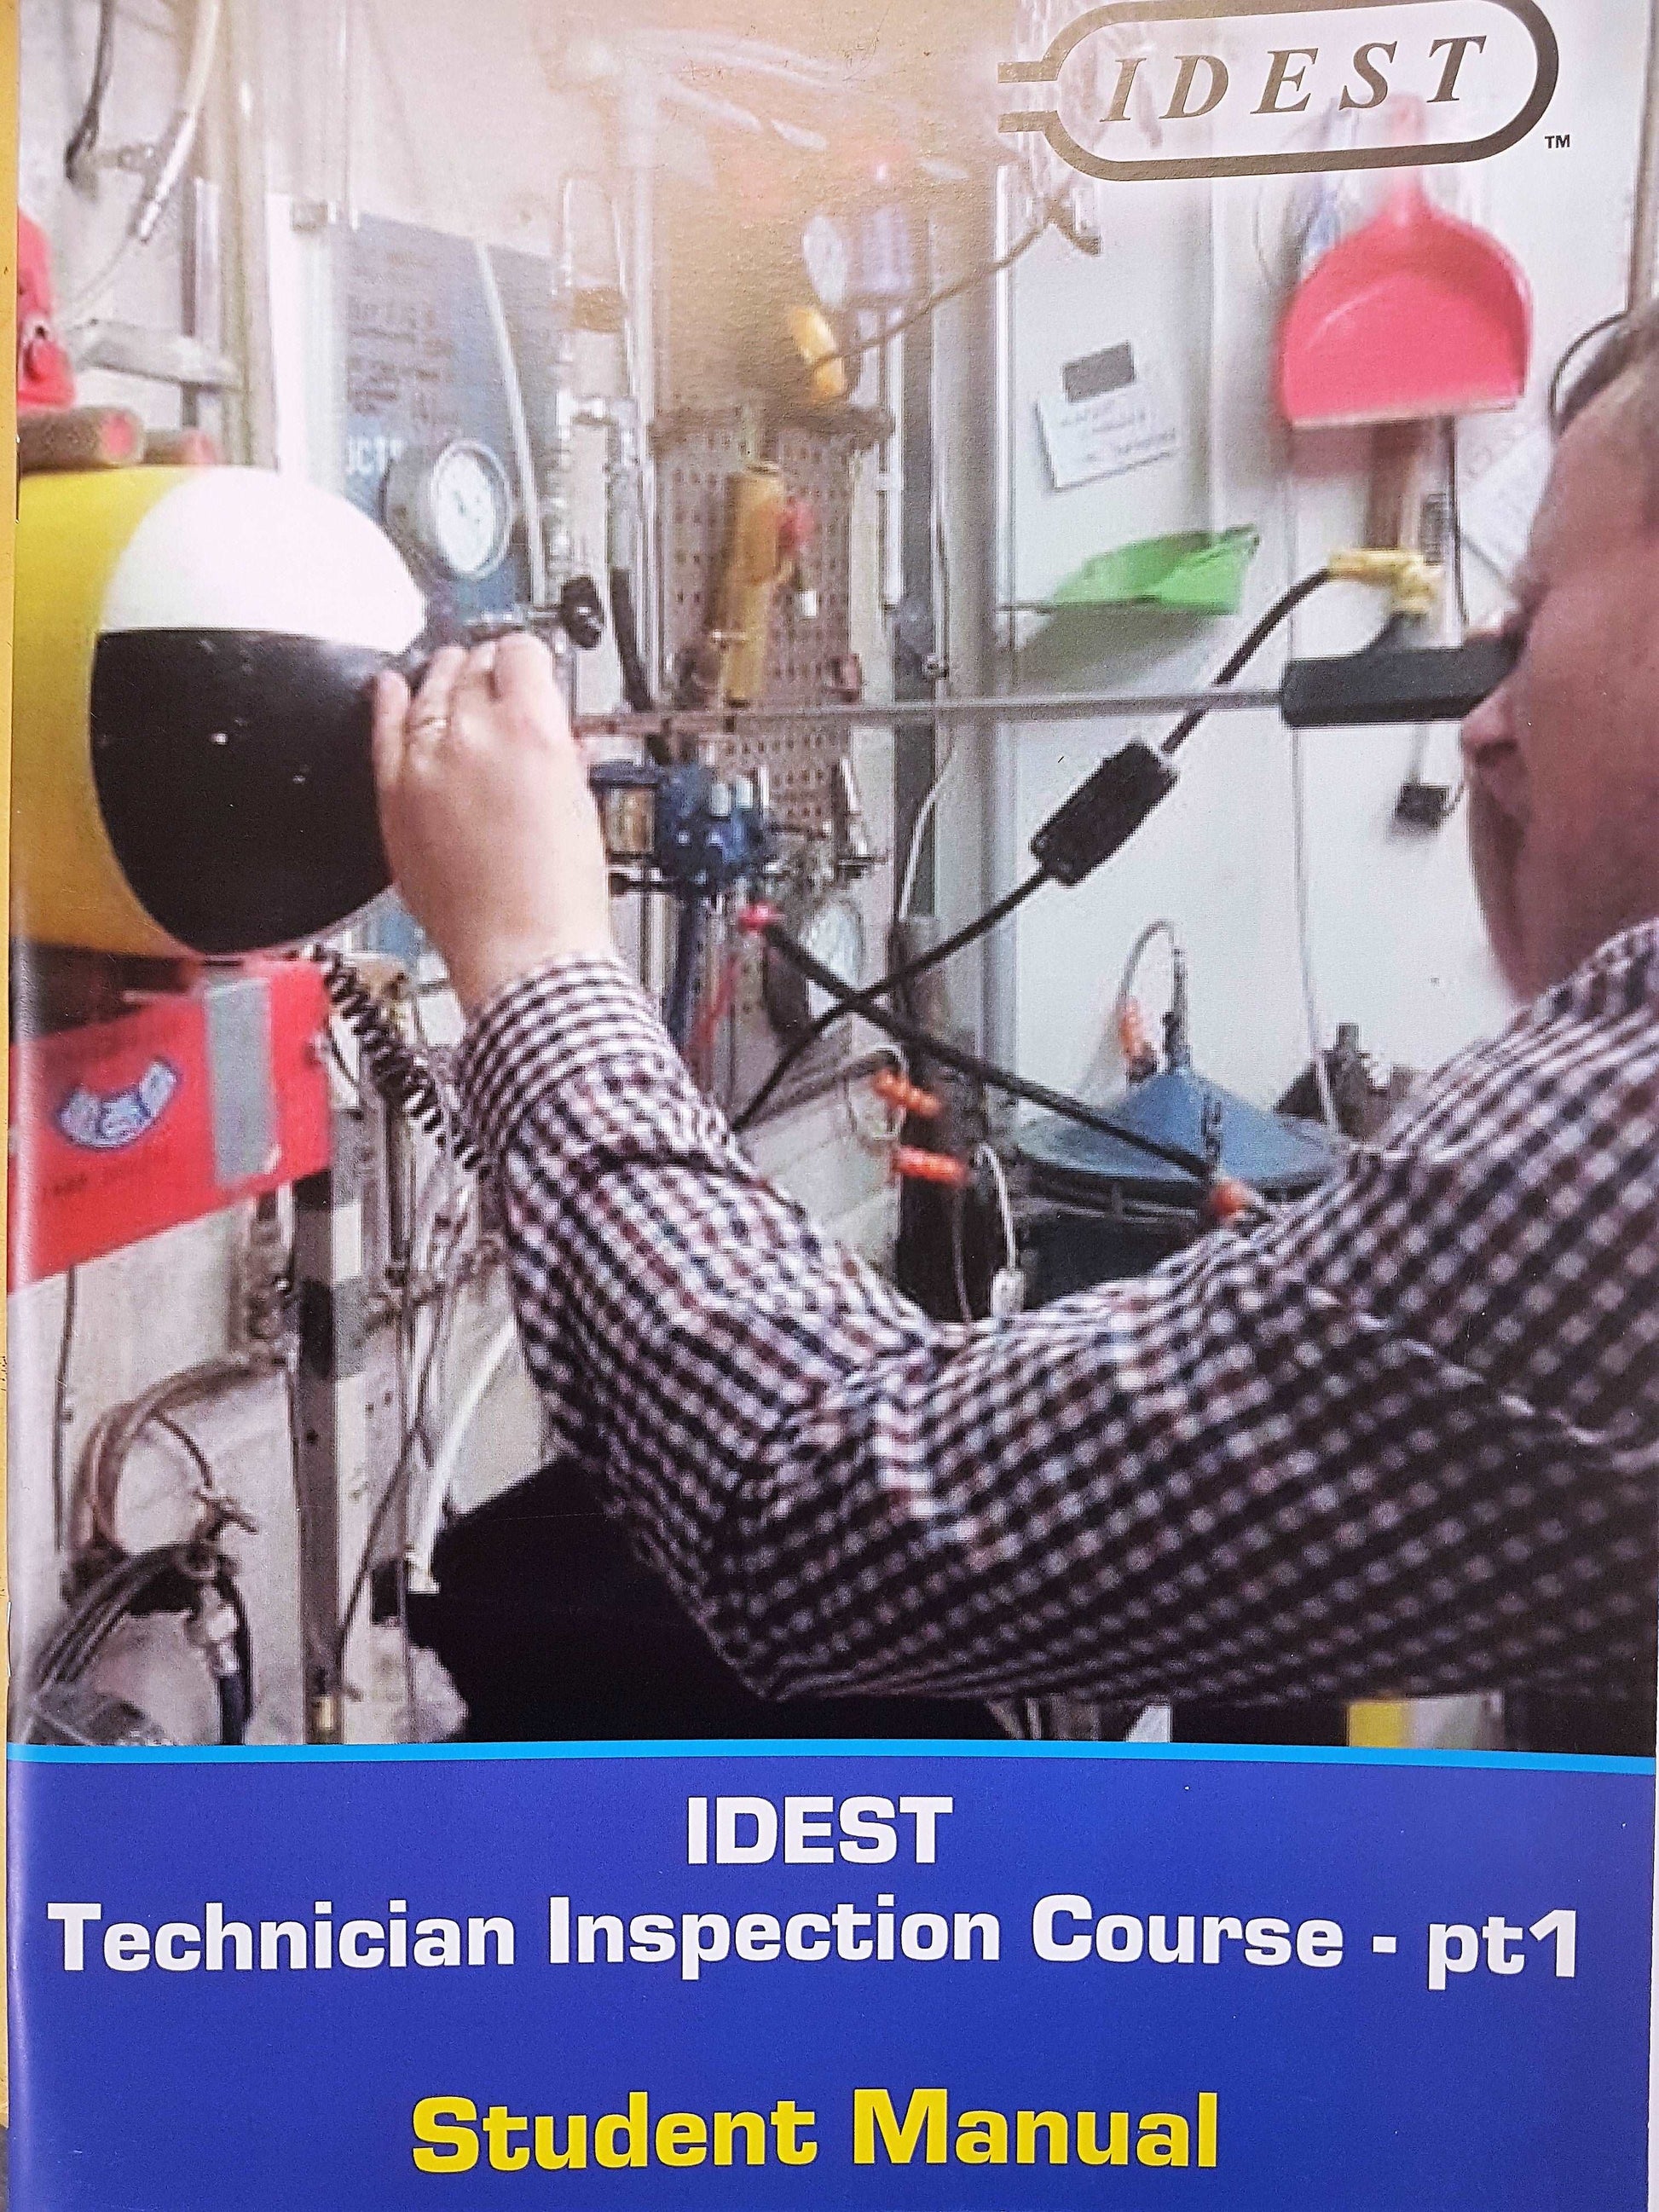 IDEST Visual Cylinder Inspection Course